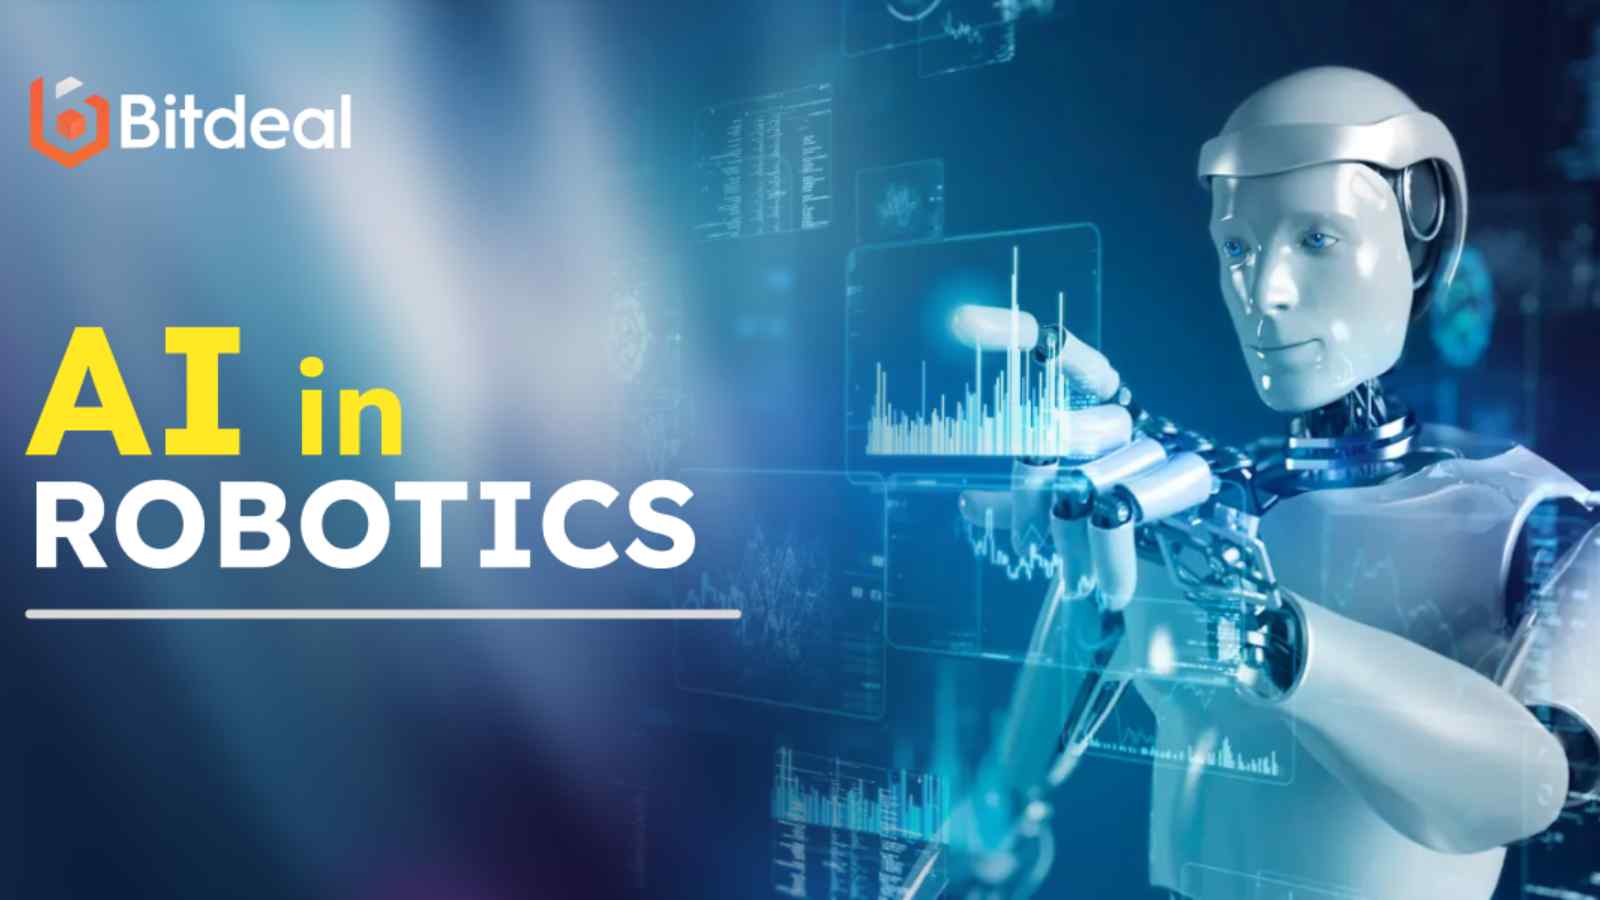 How Will AI-Driven Robotics Impact Everyday Life in The Future?